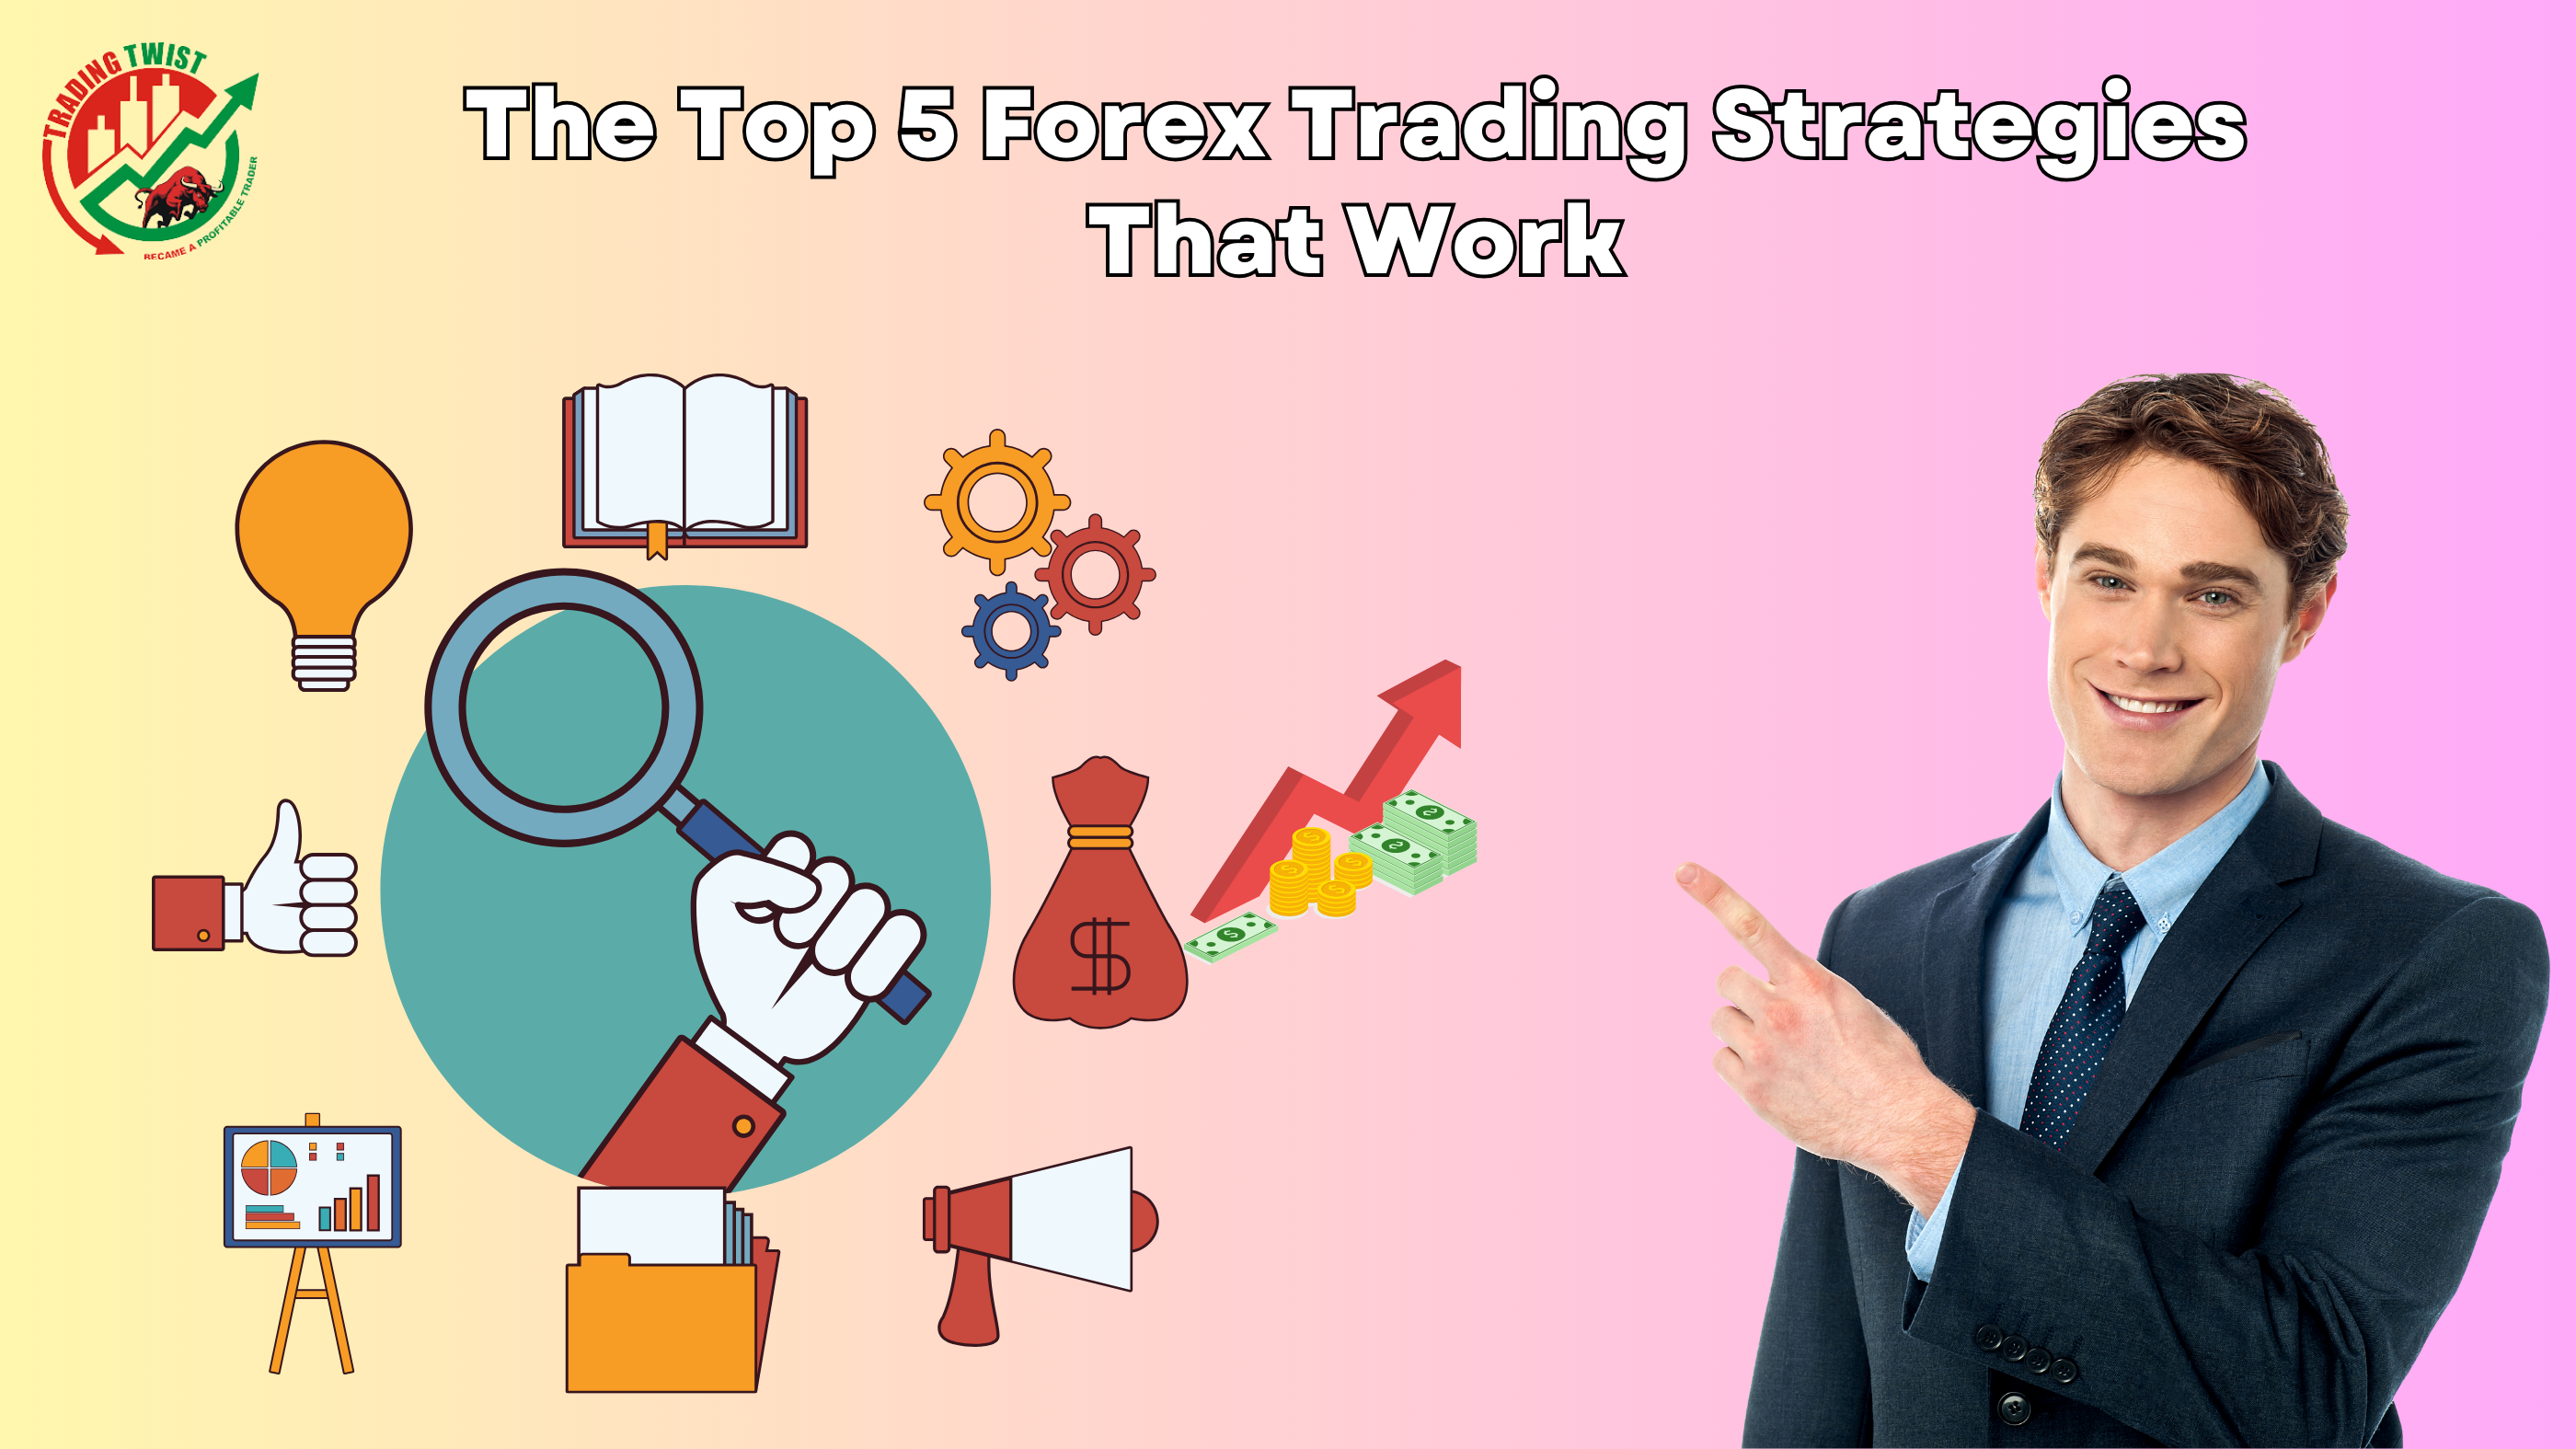 The Top 5 Forex Trading Strategies That Work